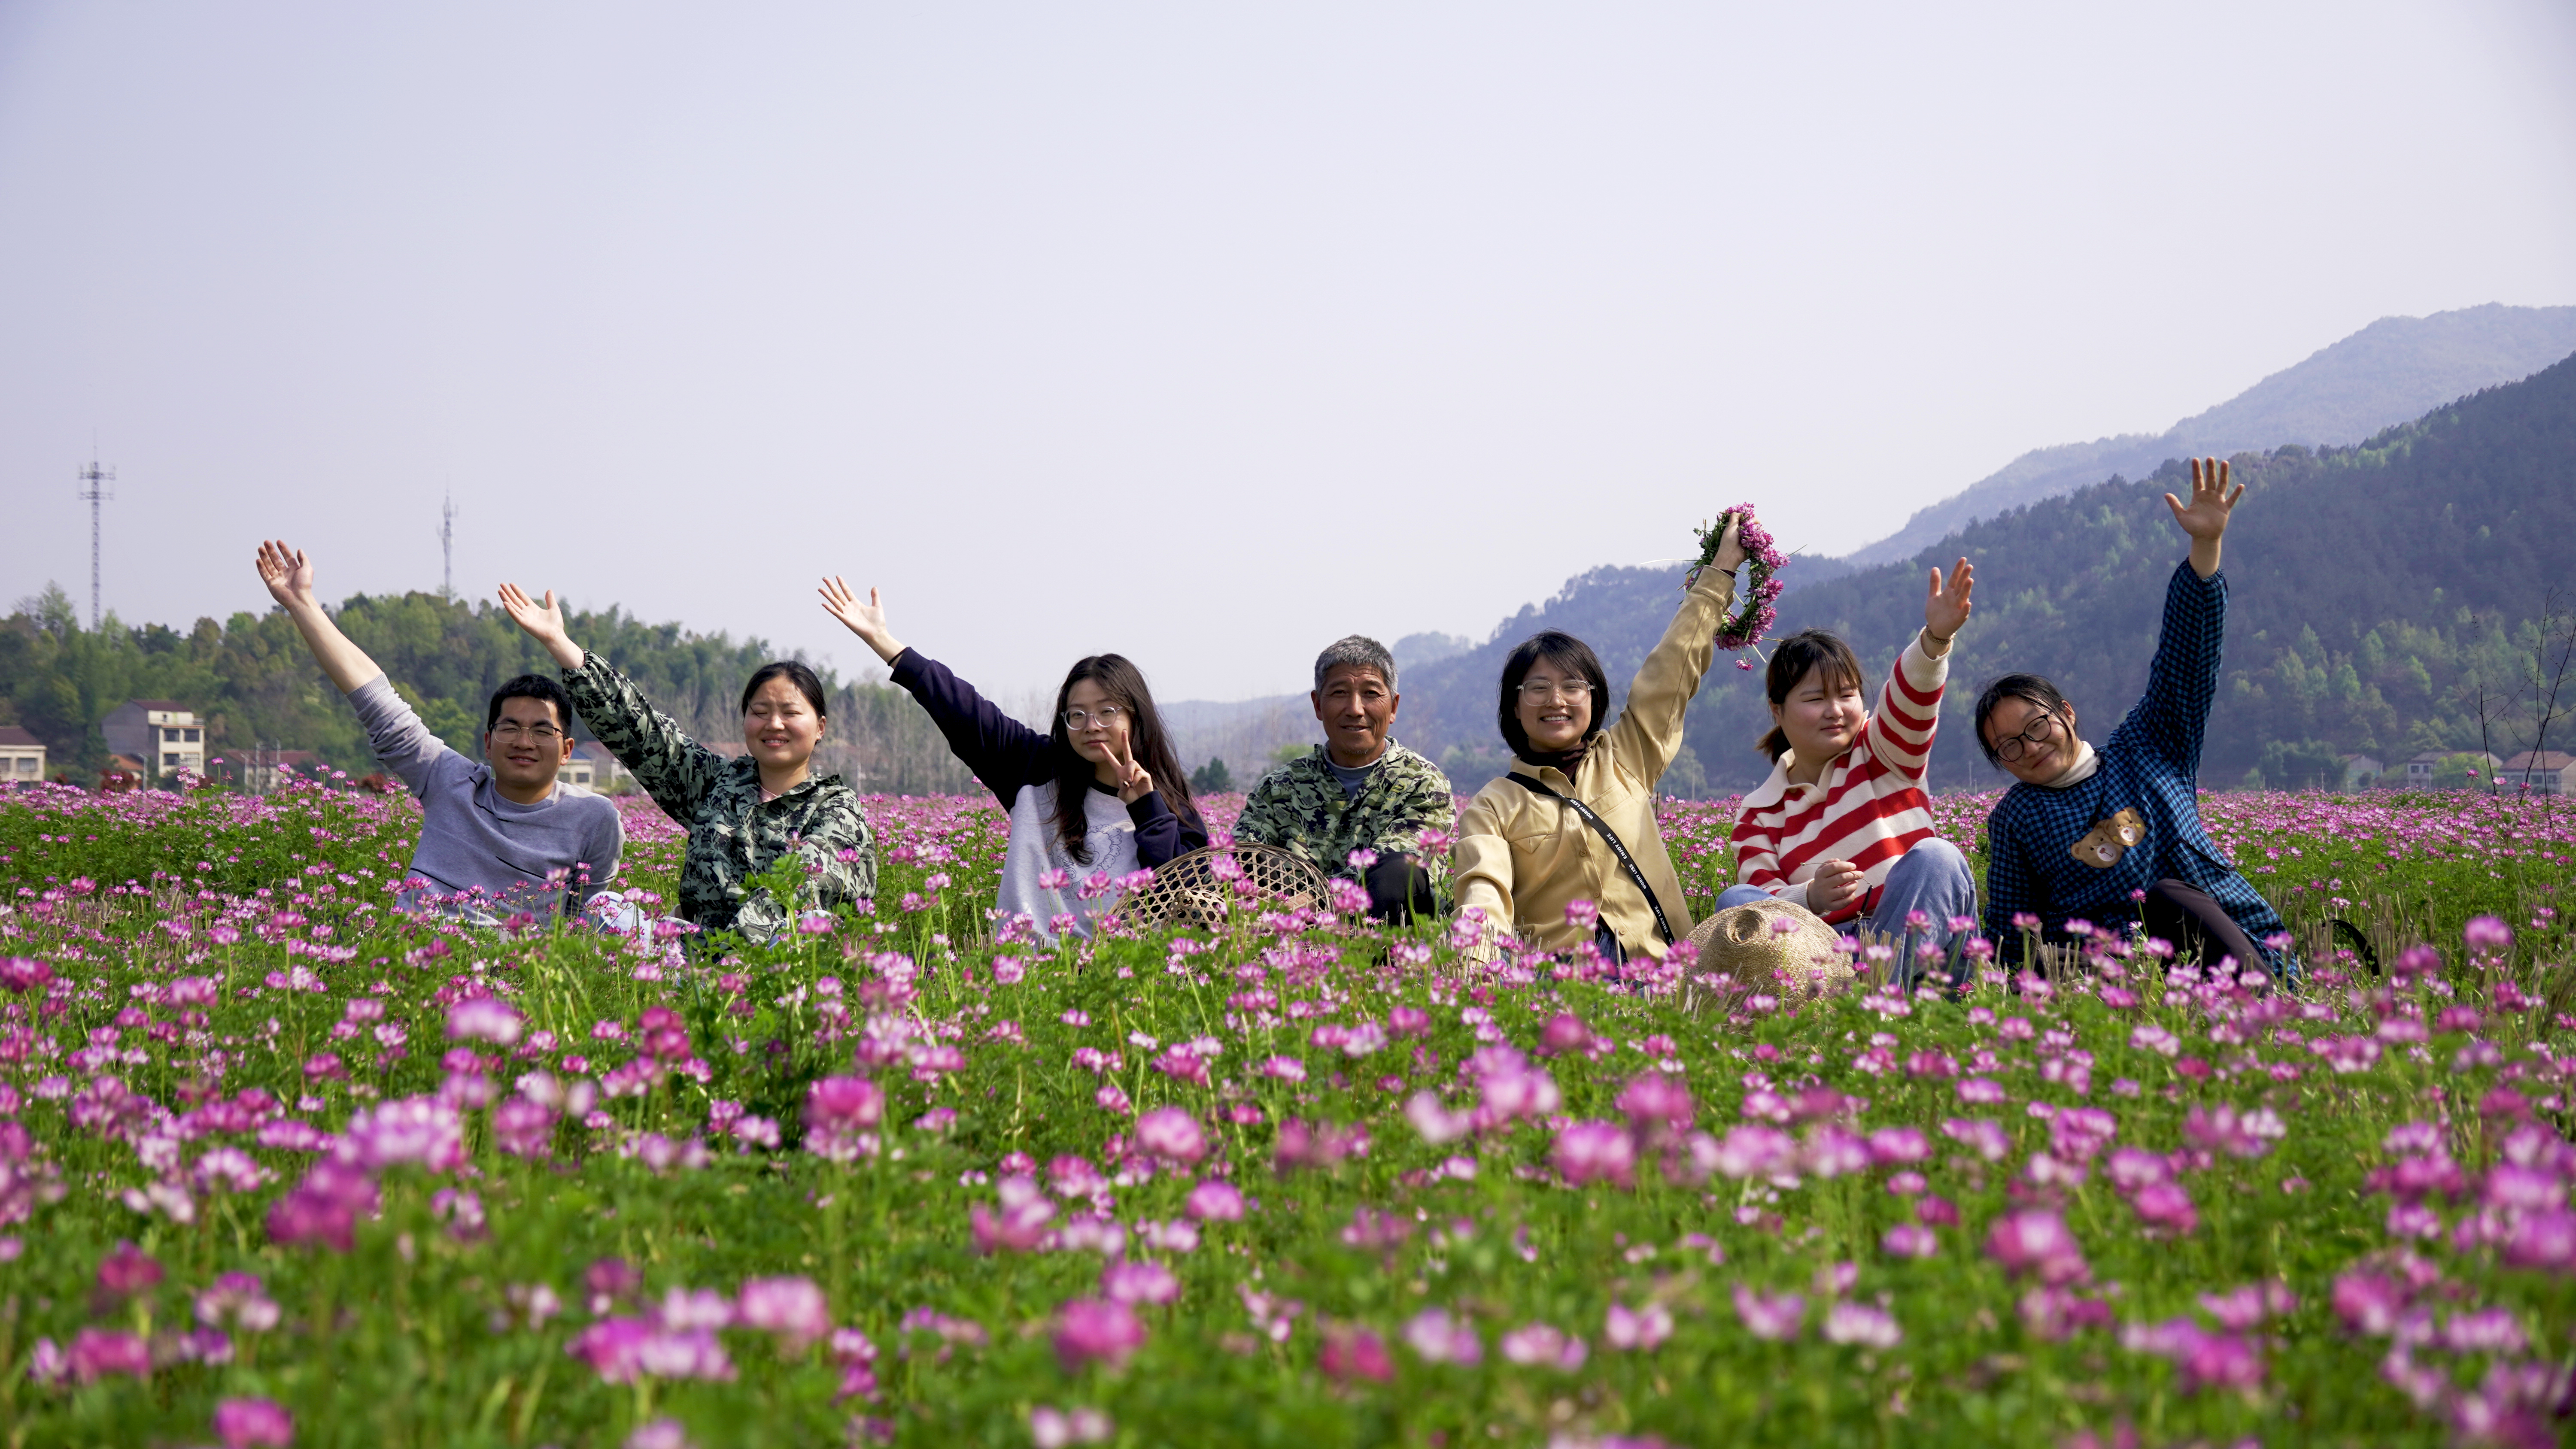 Employees of Qianyi Agriculture at Damiao production base in Huanggang City, central China's Hubei Province, April, 2023. They are in a field of Chinese milkvetch, which is commonly used in farming as a green manure. /Courtesy of Li Mingpan